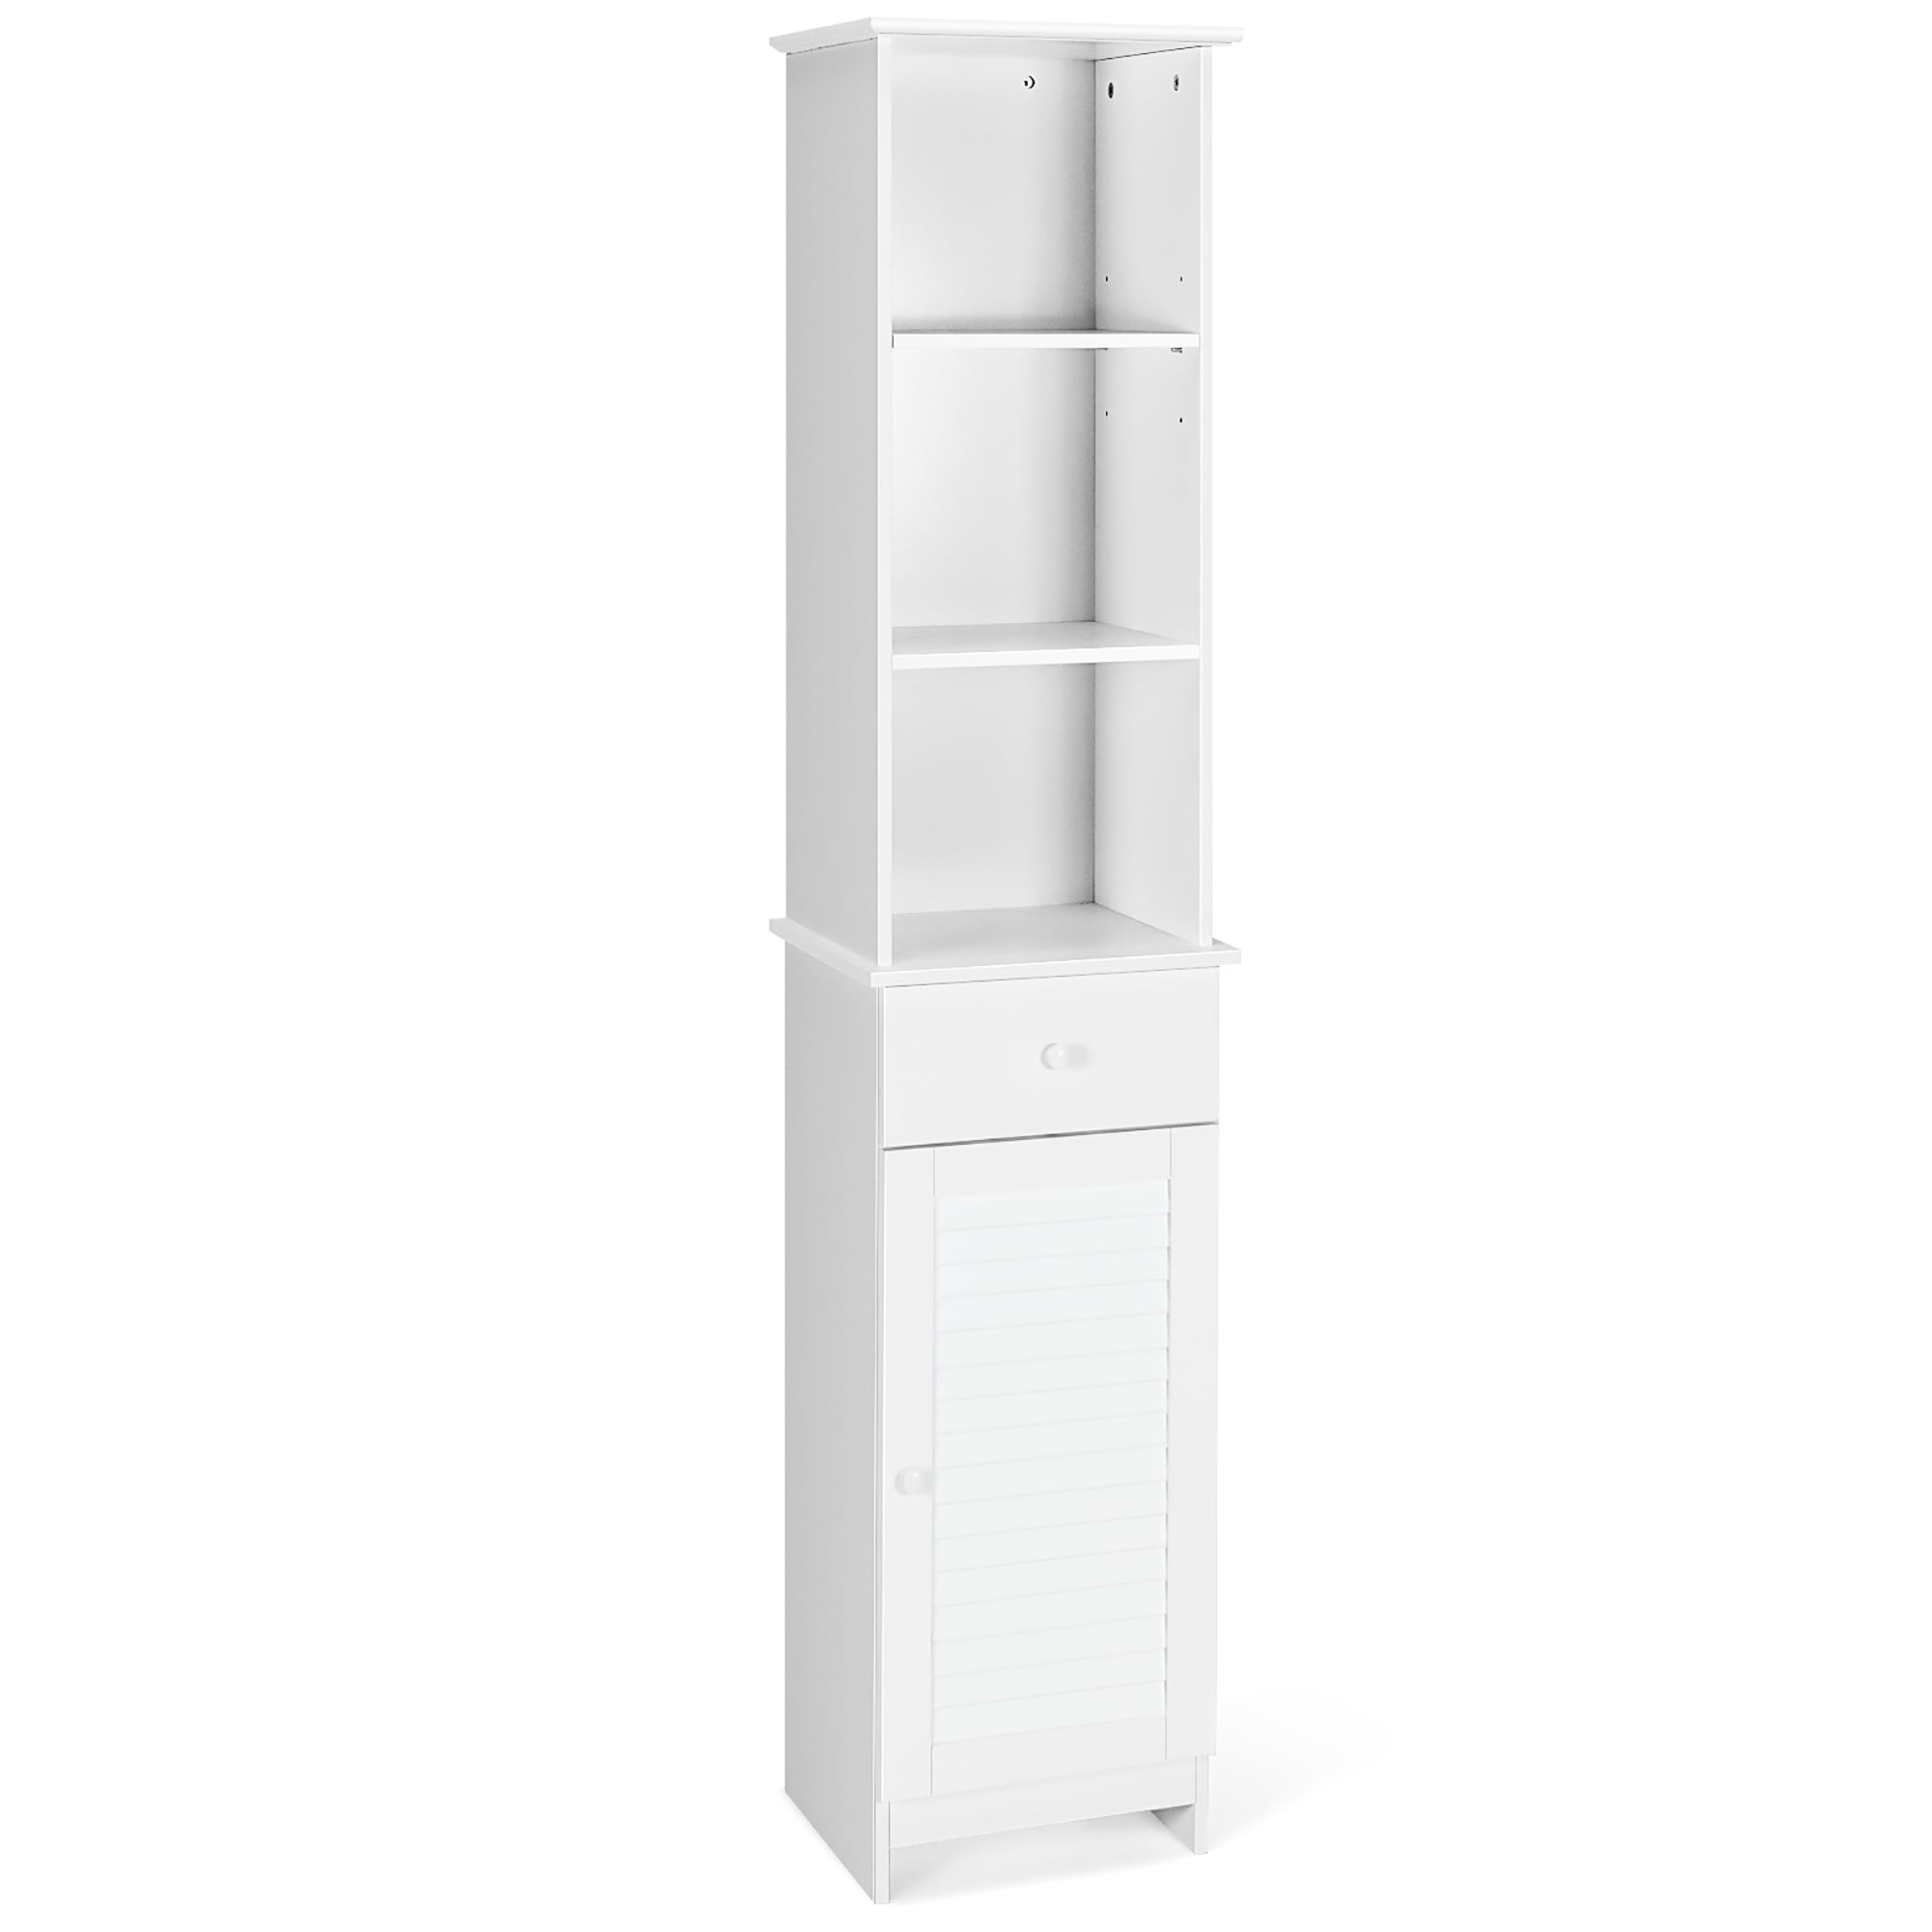 Free Standing Linen Tower, Bathroom Storage Cabinet, Bookcase with 3 Open Shelves